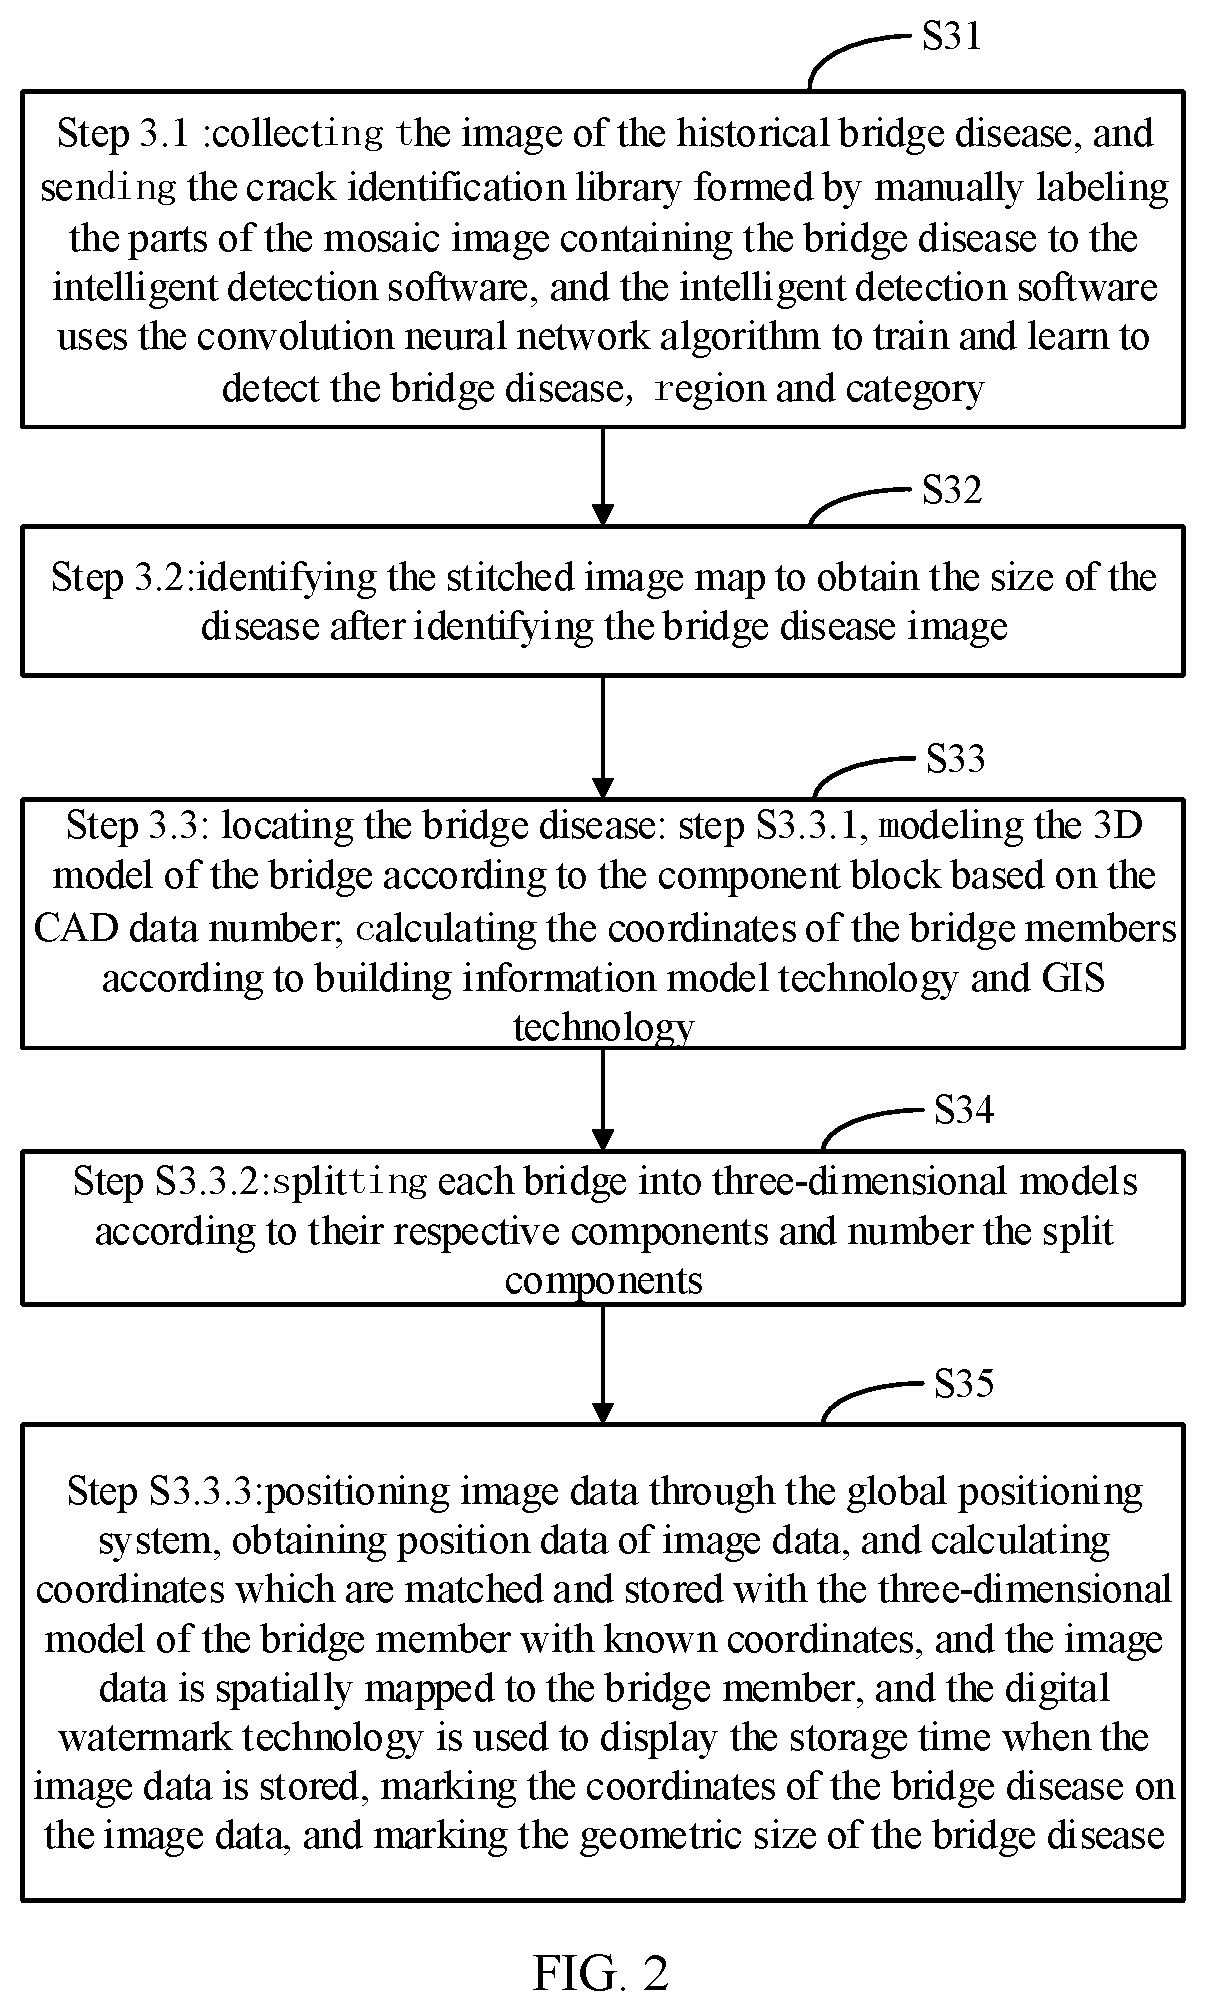 High-precision Intelligent Detection Method For Bridge Diseases Based On Spatial Position